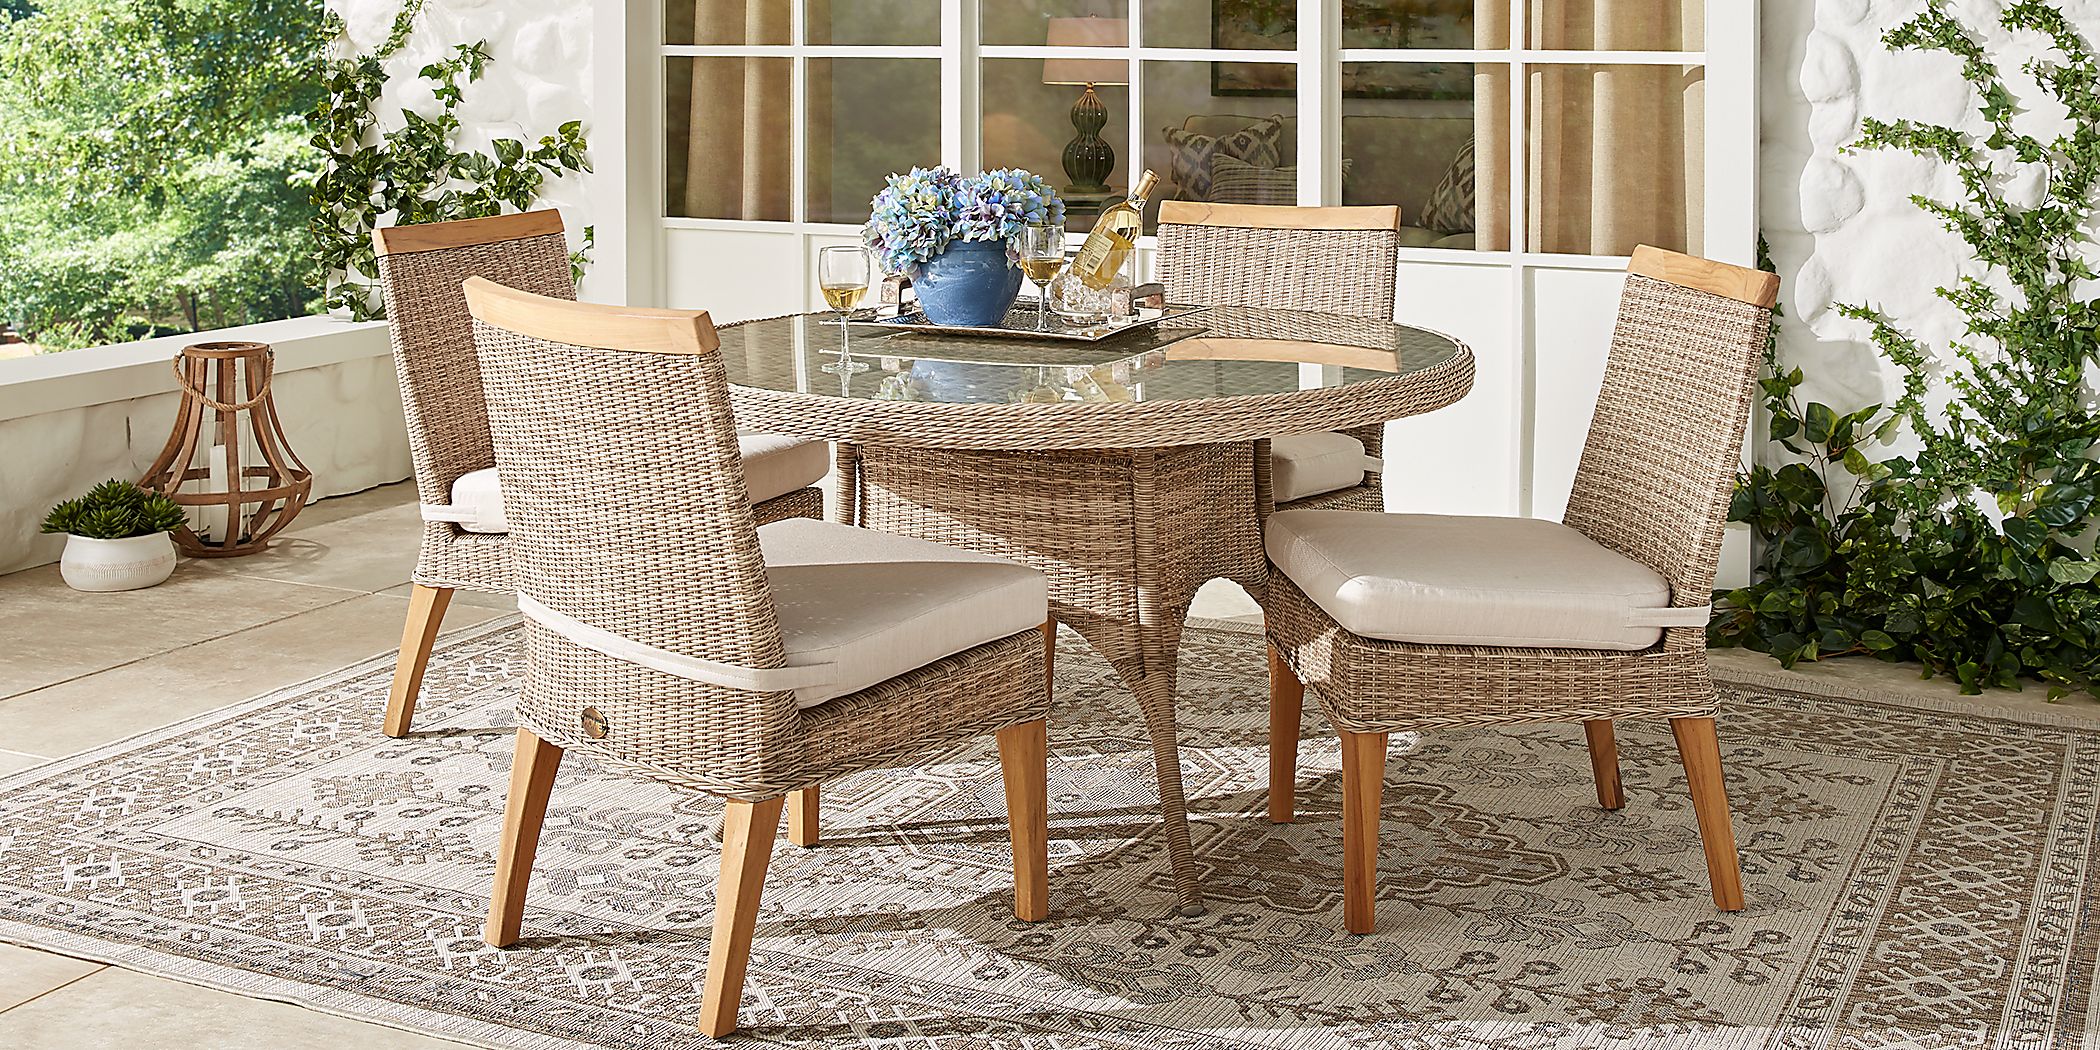 Cindy Crawford Home Hamptons Cove Gray 5 Pc Round Outdoor Dining Set with Flax Cushions